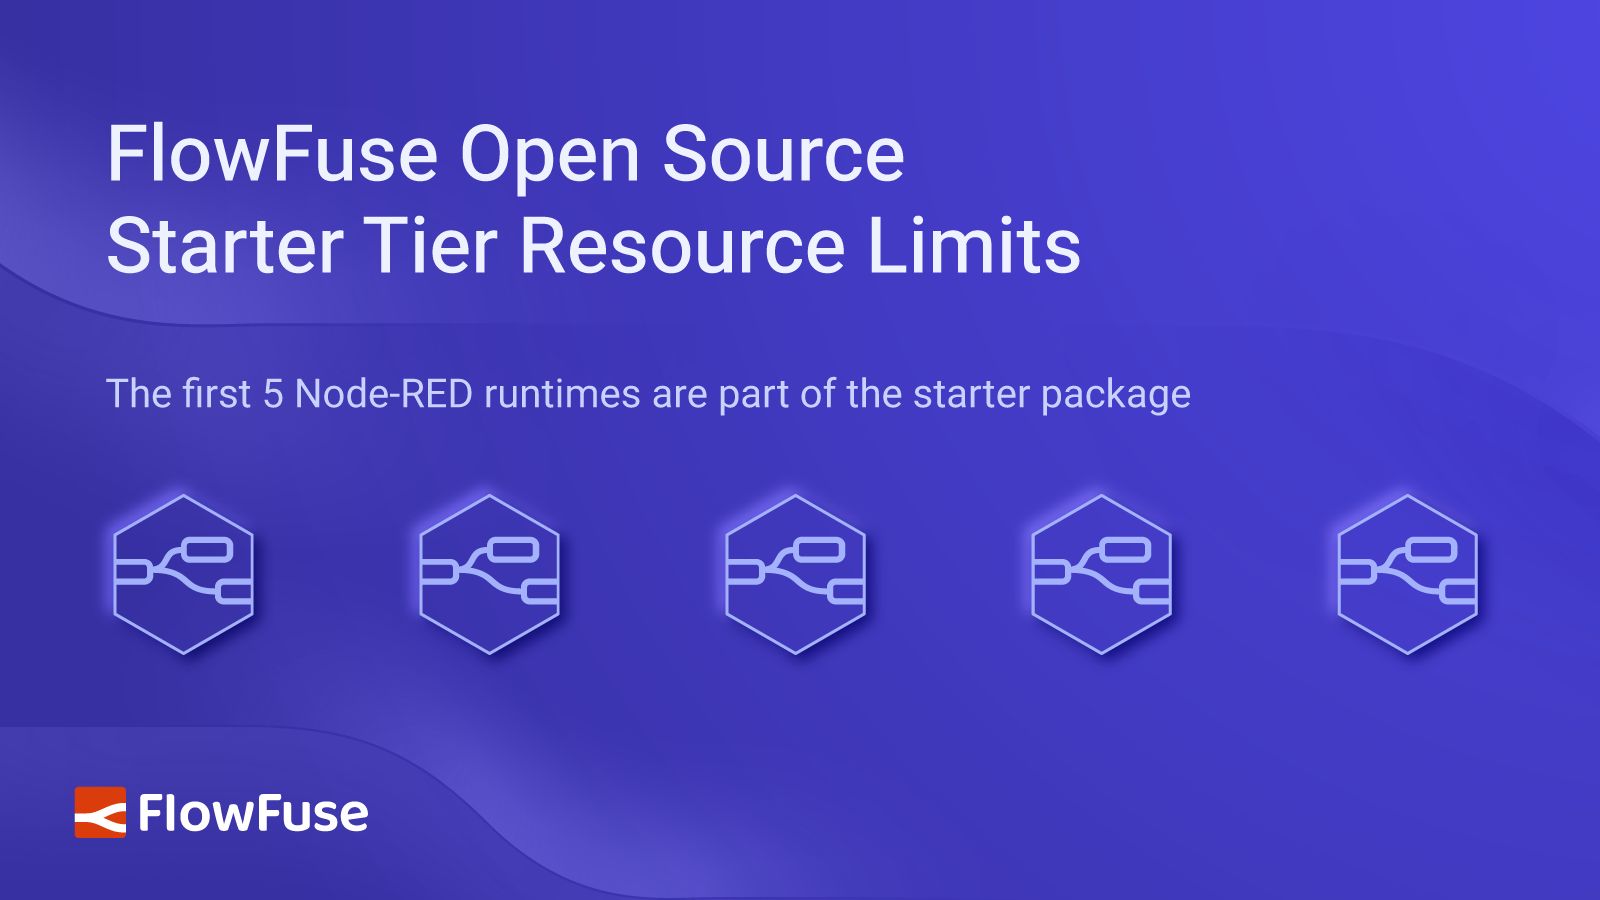 Image representing FlowFuse Open Source Starter Tier Resource Limits